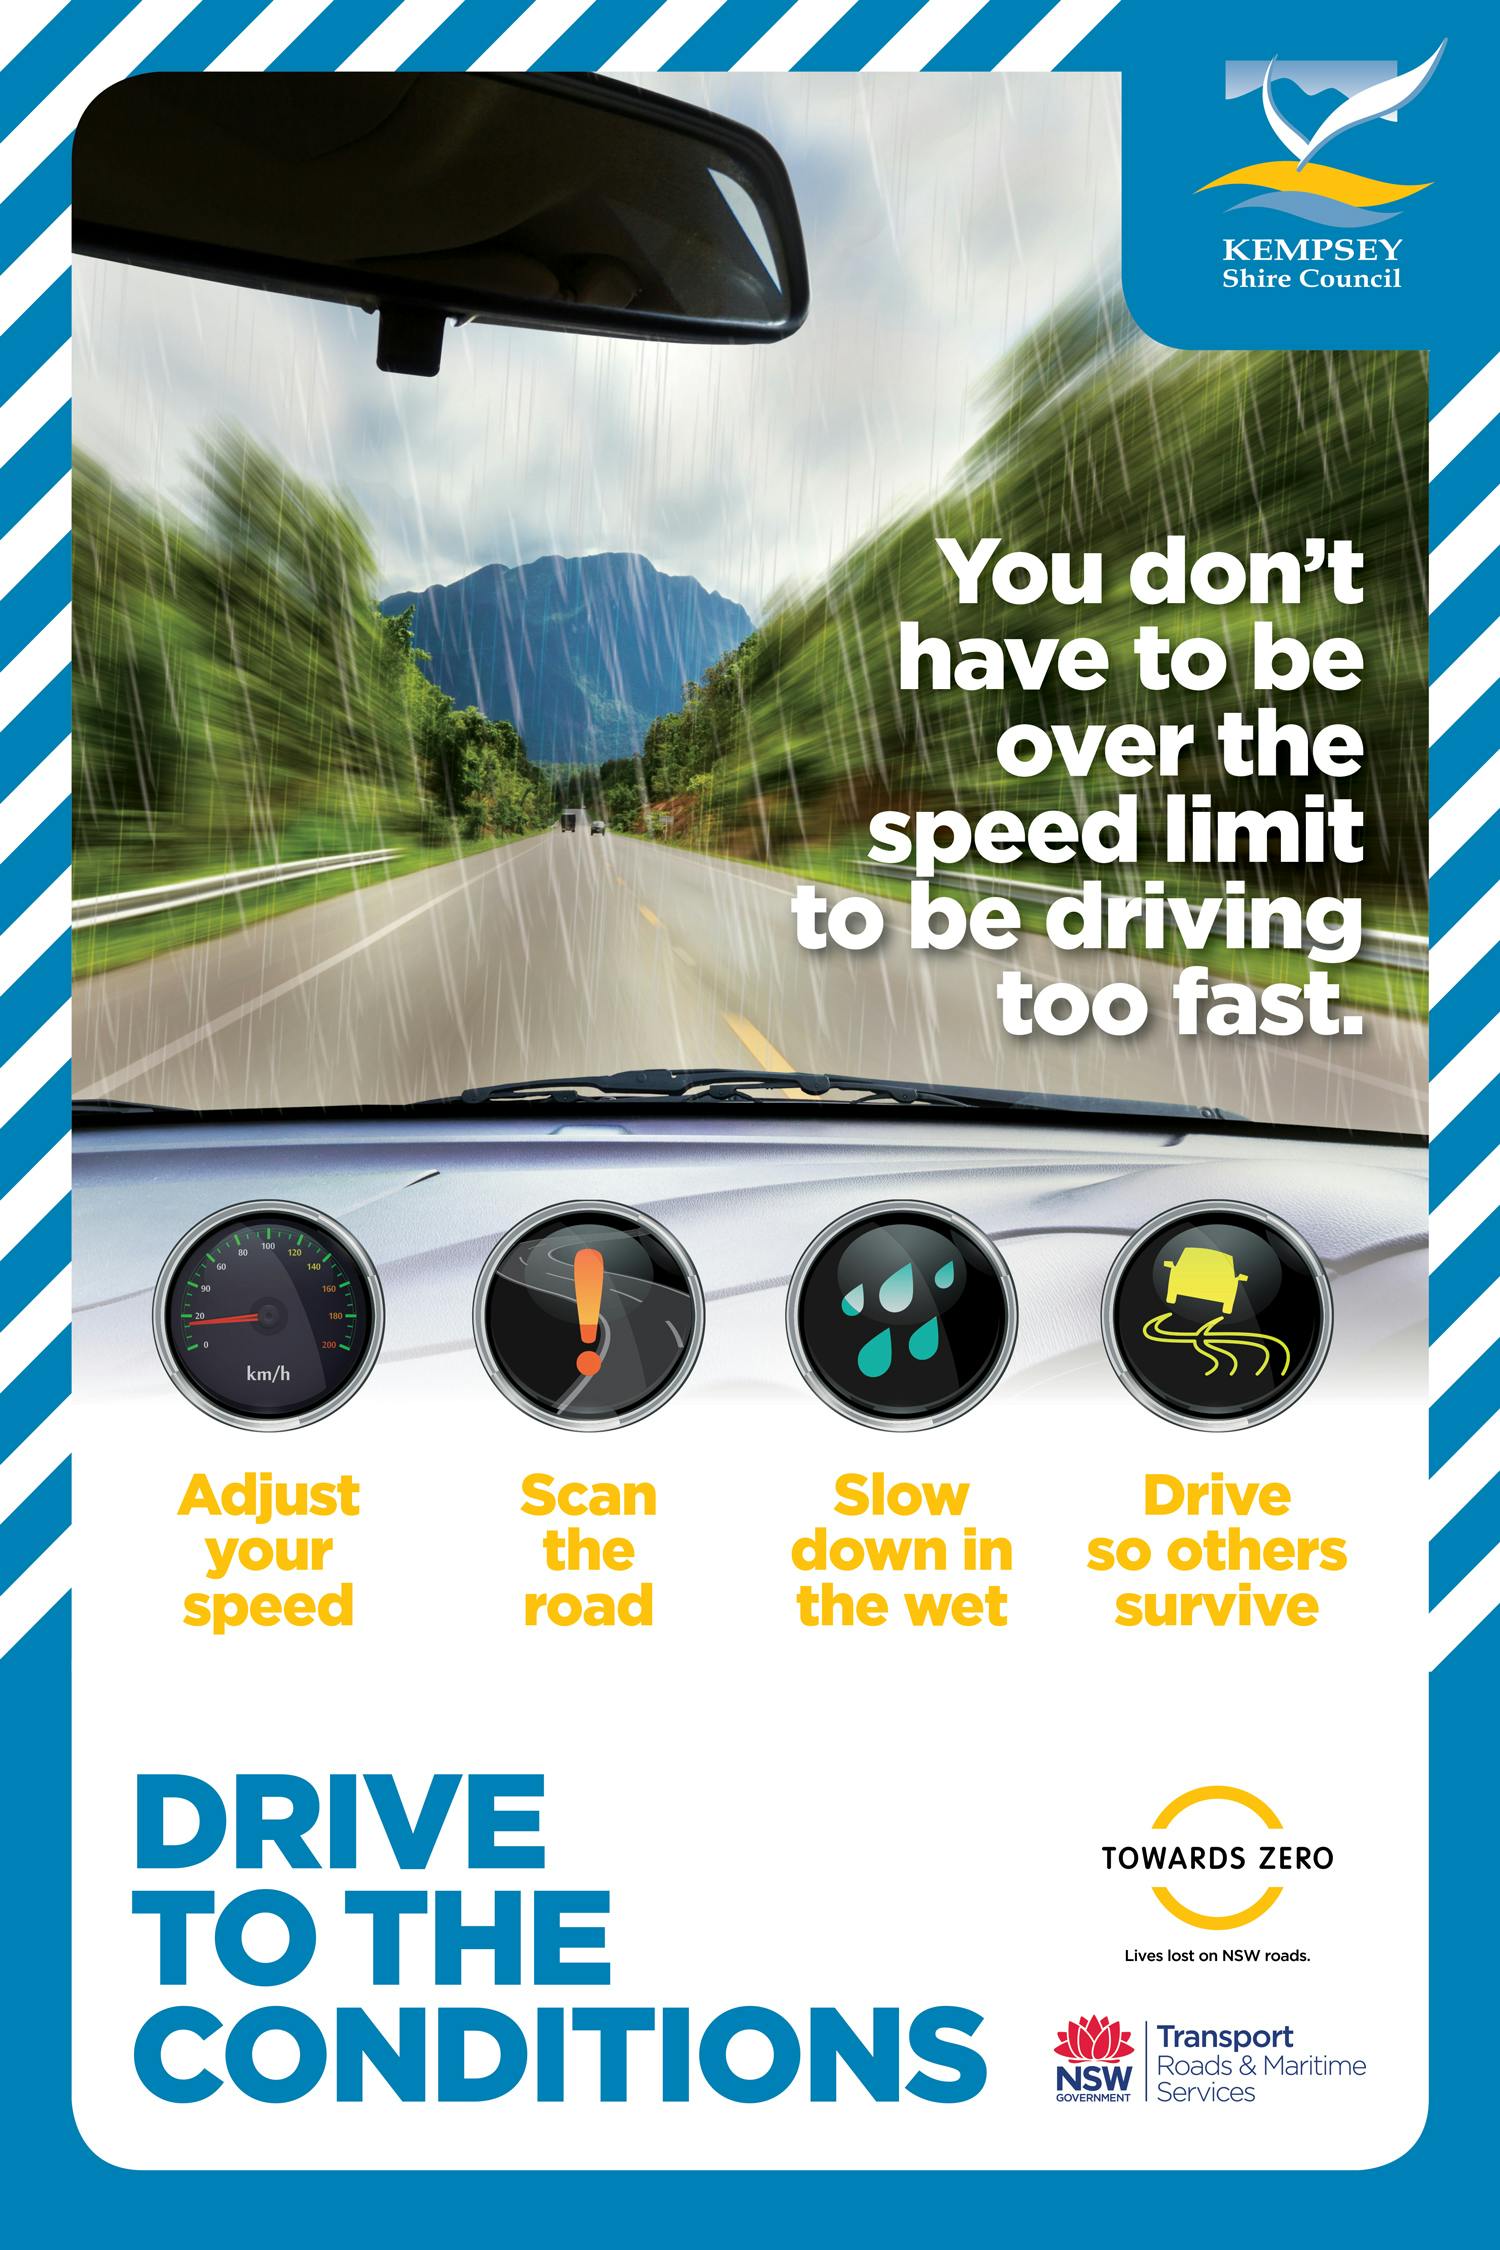 You don't have to be over the speed limit to be driving too fast